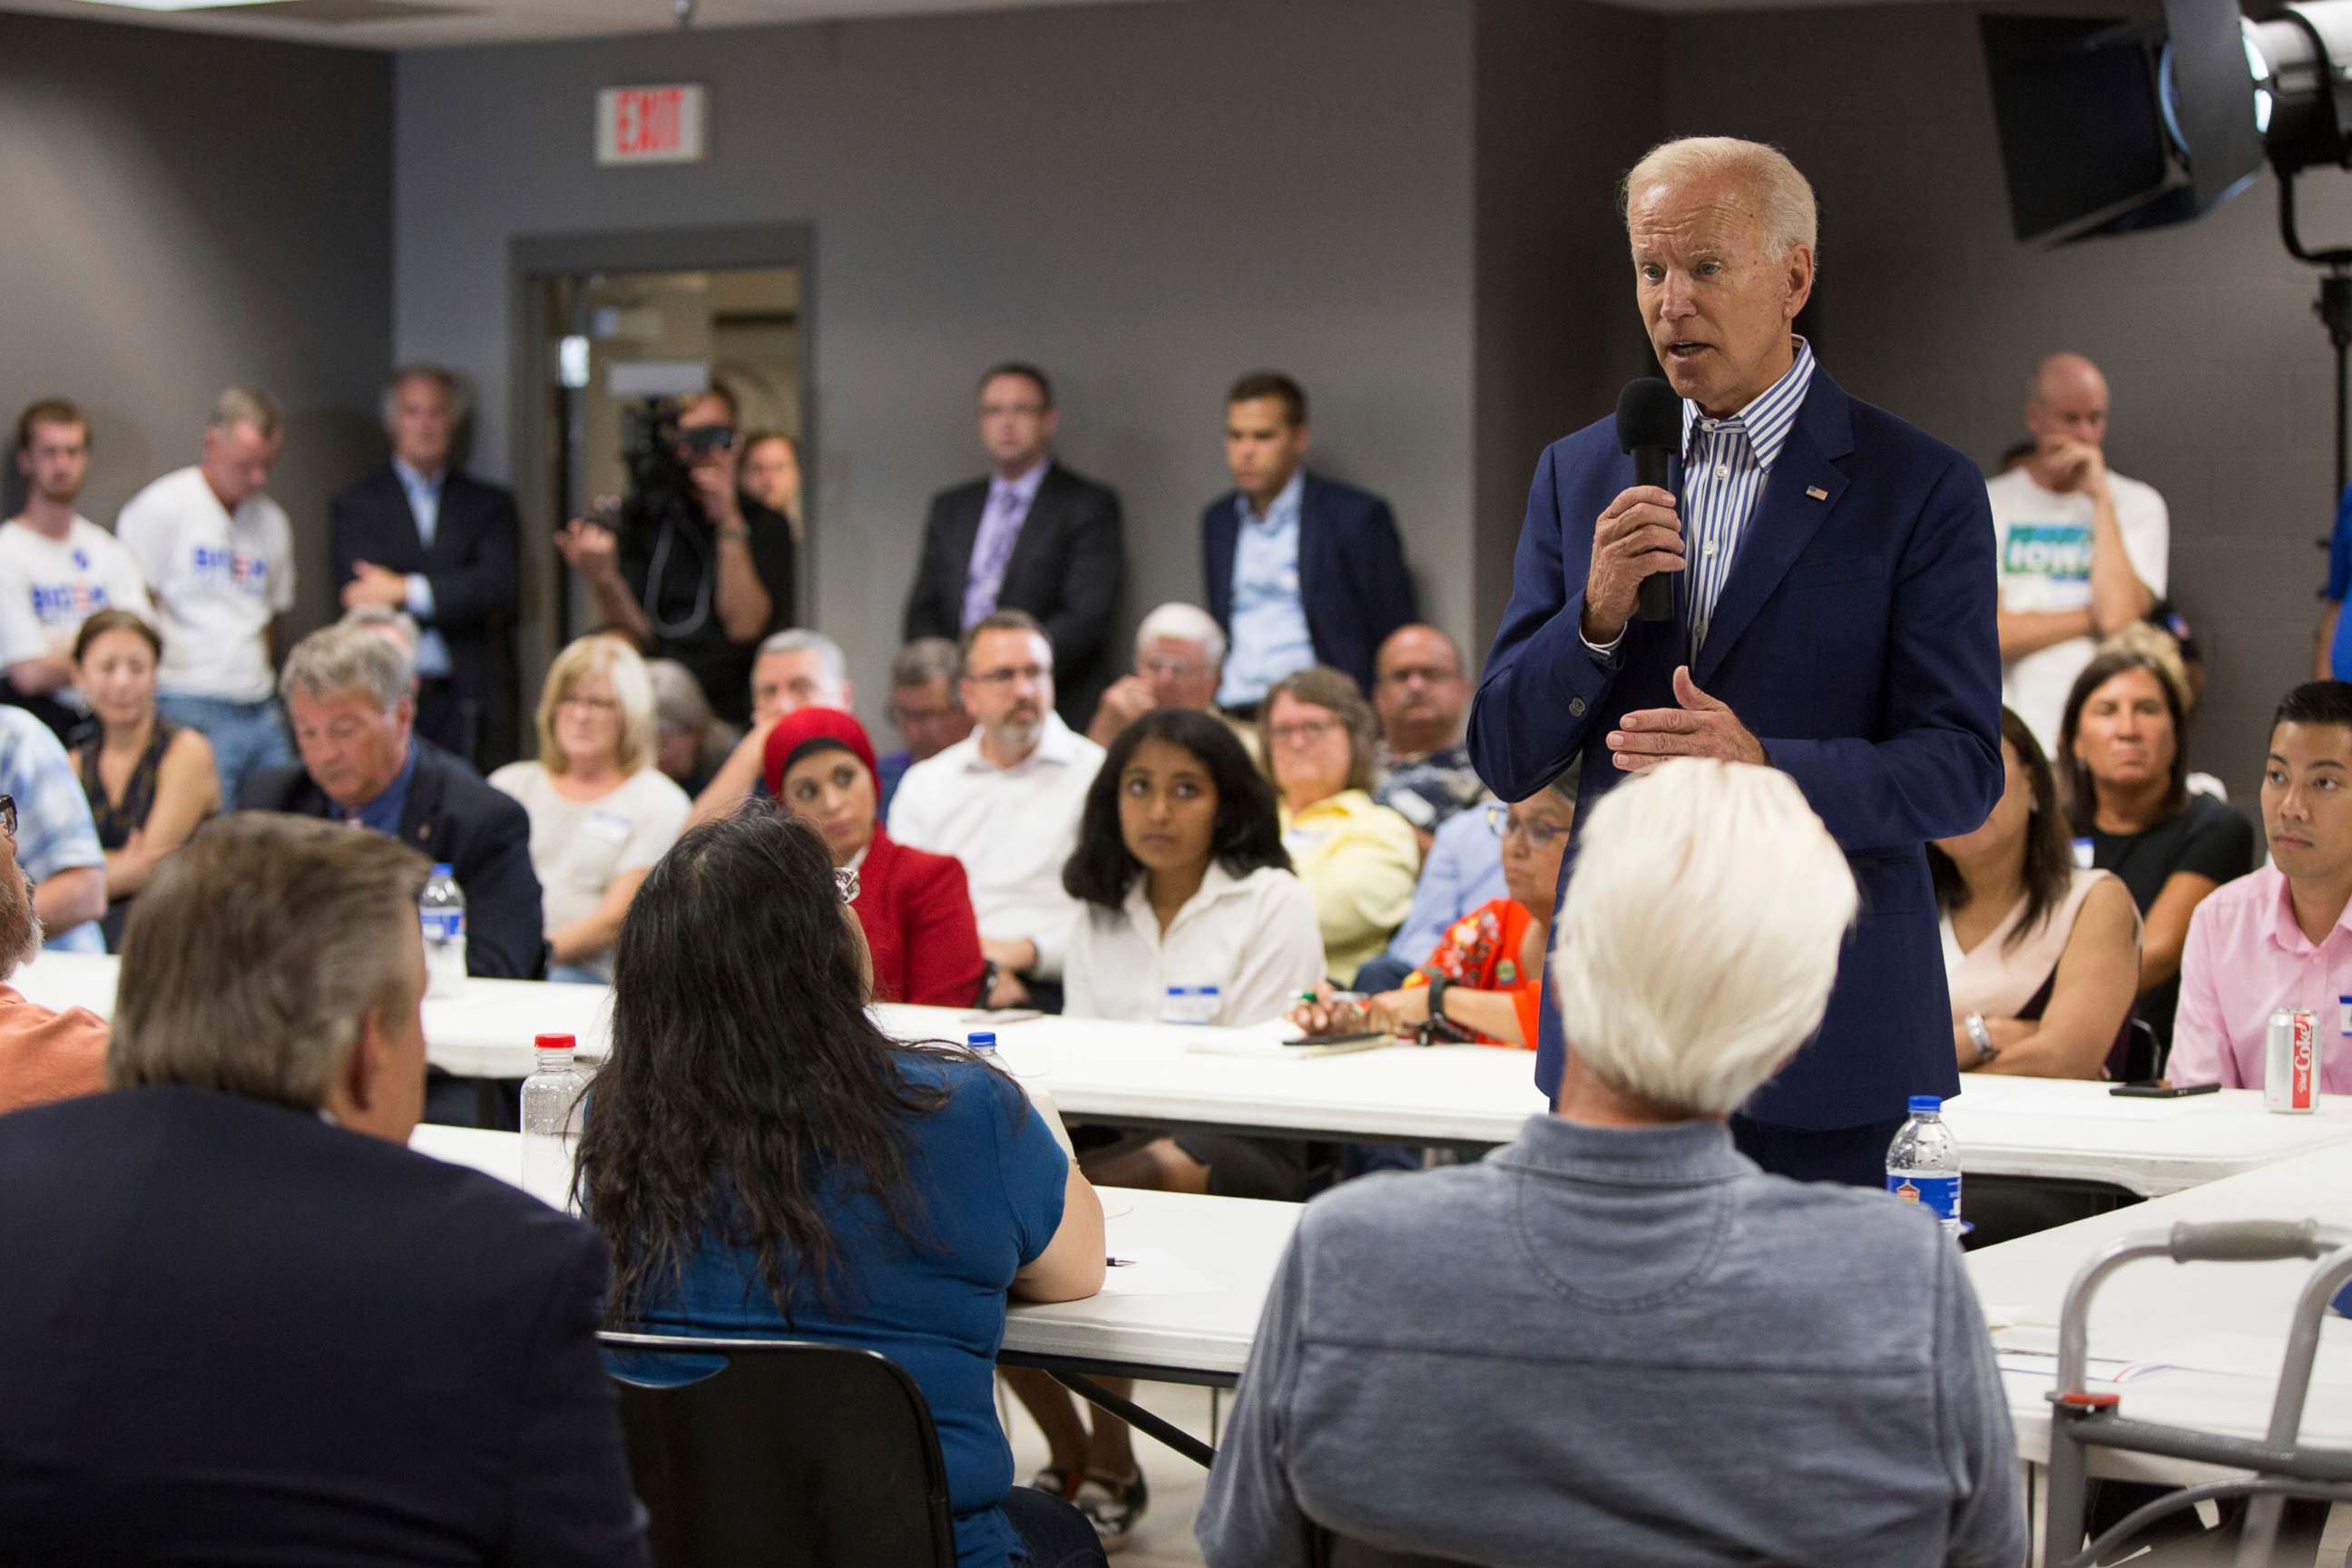 PHOTO: Democratic presidential candidate and former Vice President Joe Biden speaks at the Asian and Latino Coalition Town Hall at the Plumbers and Steamfitters Local 33 on August 8, 2019, in Des Moines, Iowa.